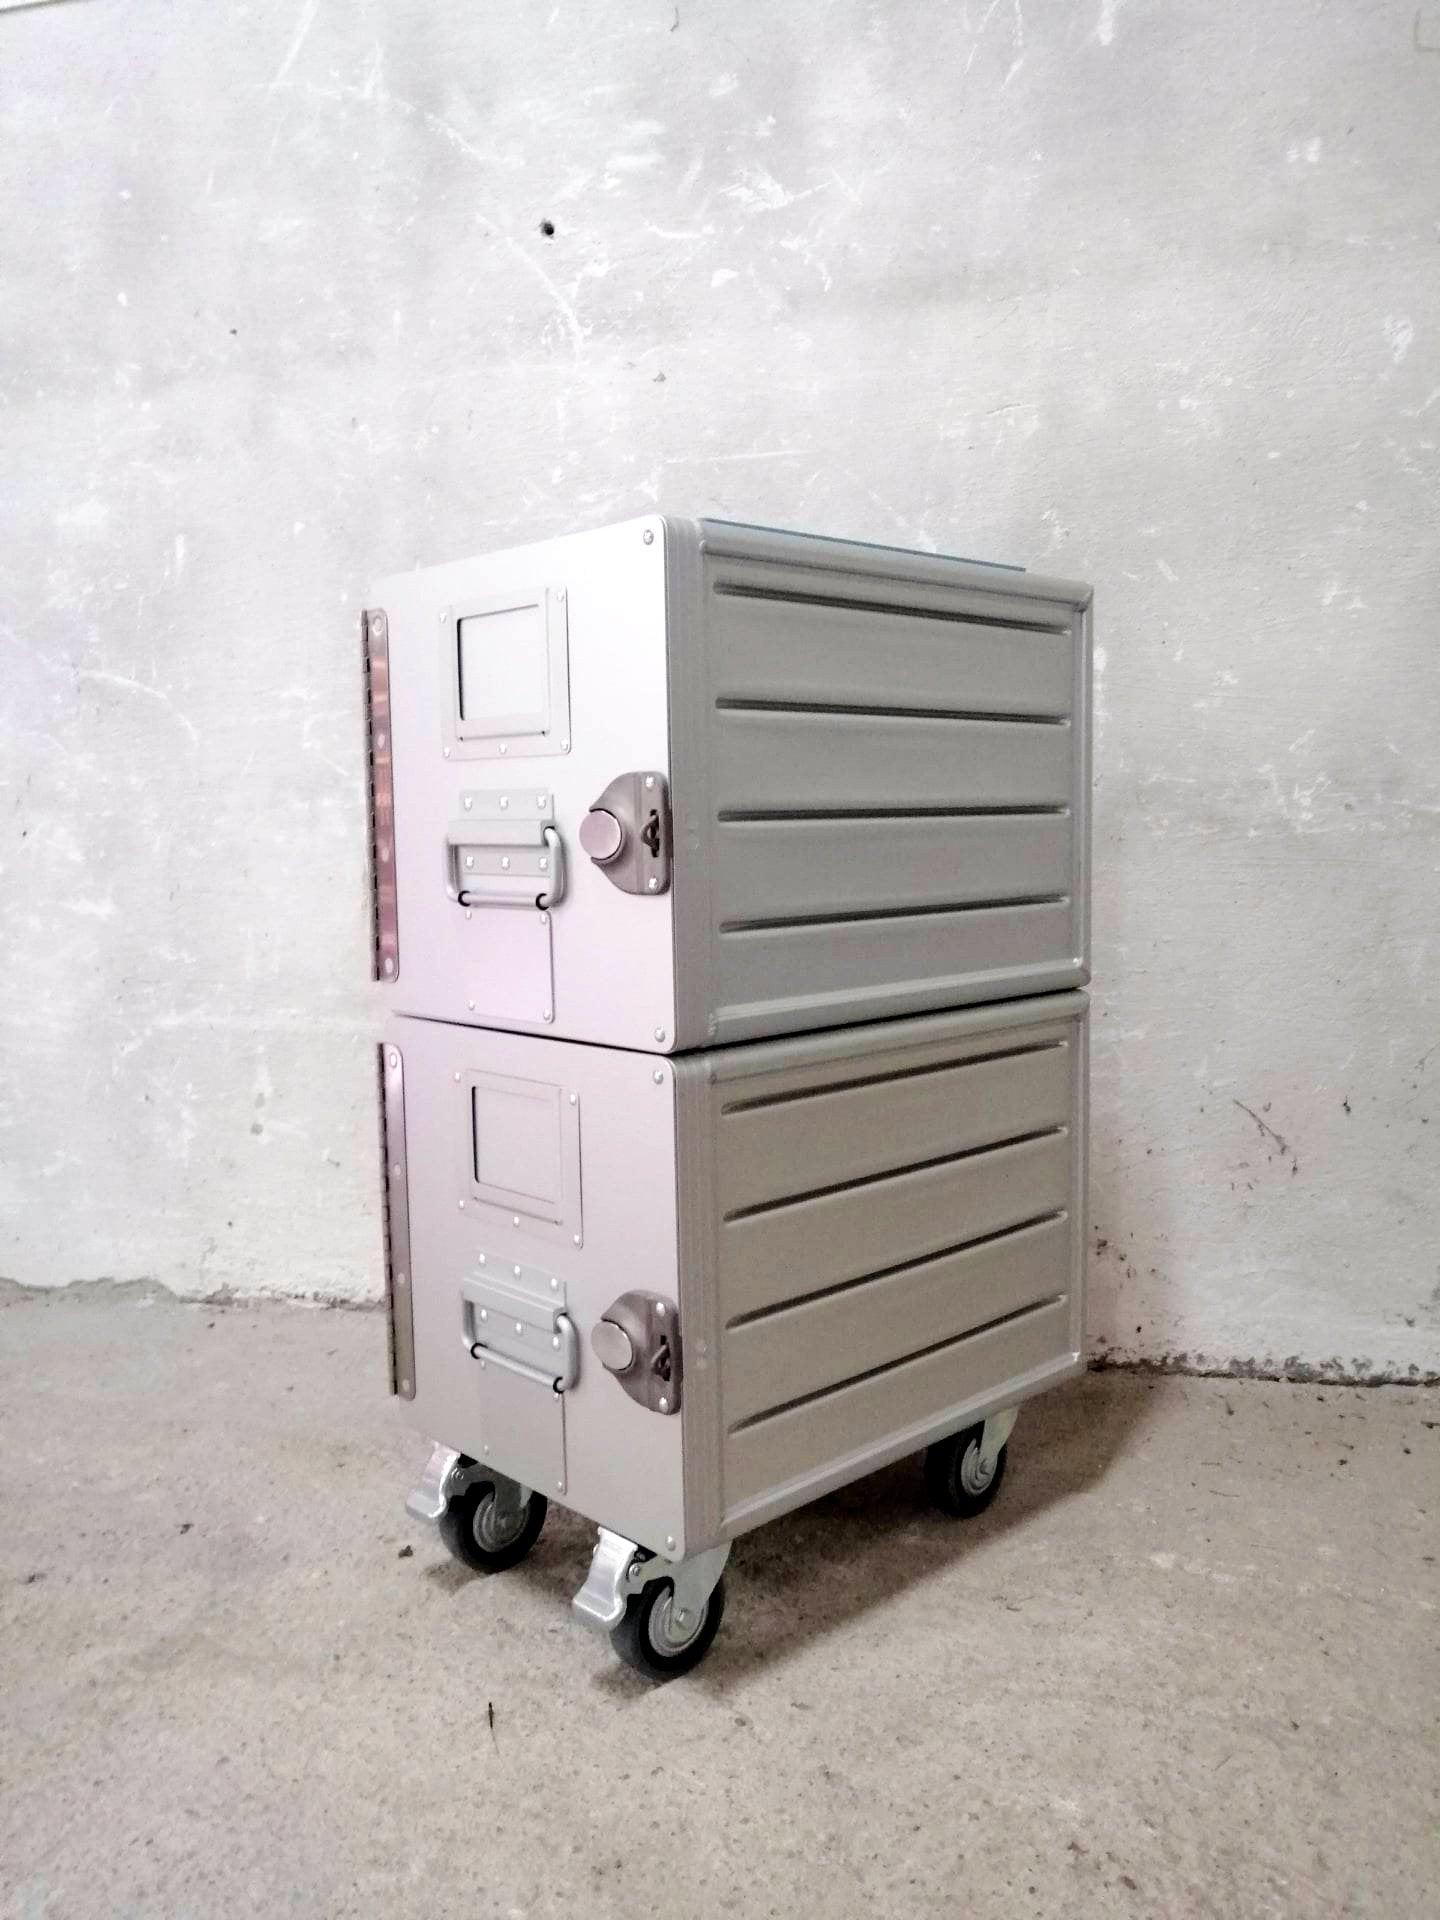 Brand New Aircraft Cabinet, Aviaton Storage Cart, Side Table Made of NEW Airline Galley Boxes Hainan with 4 Drawers, Handmade